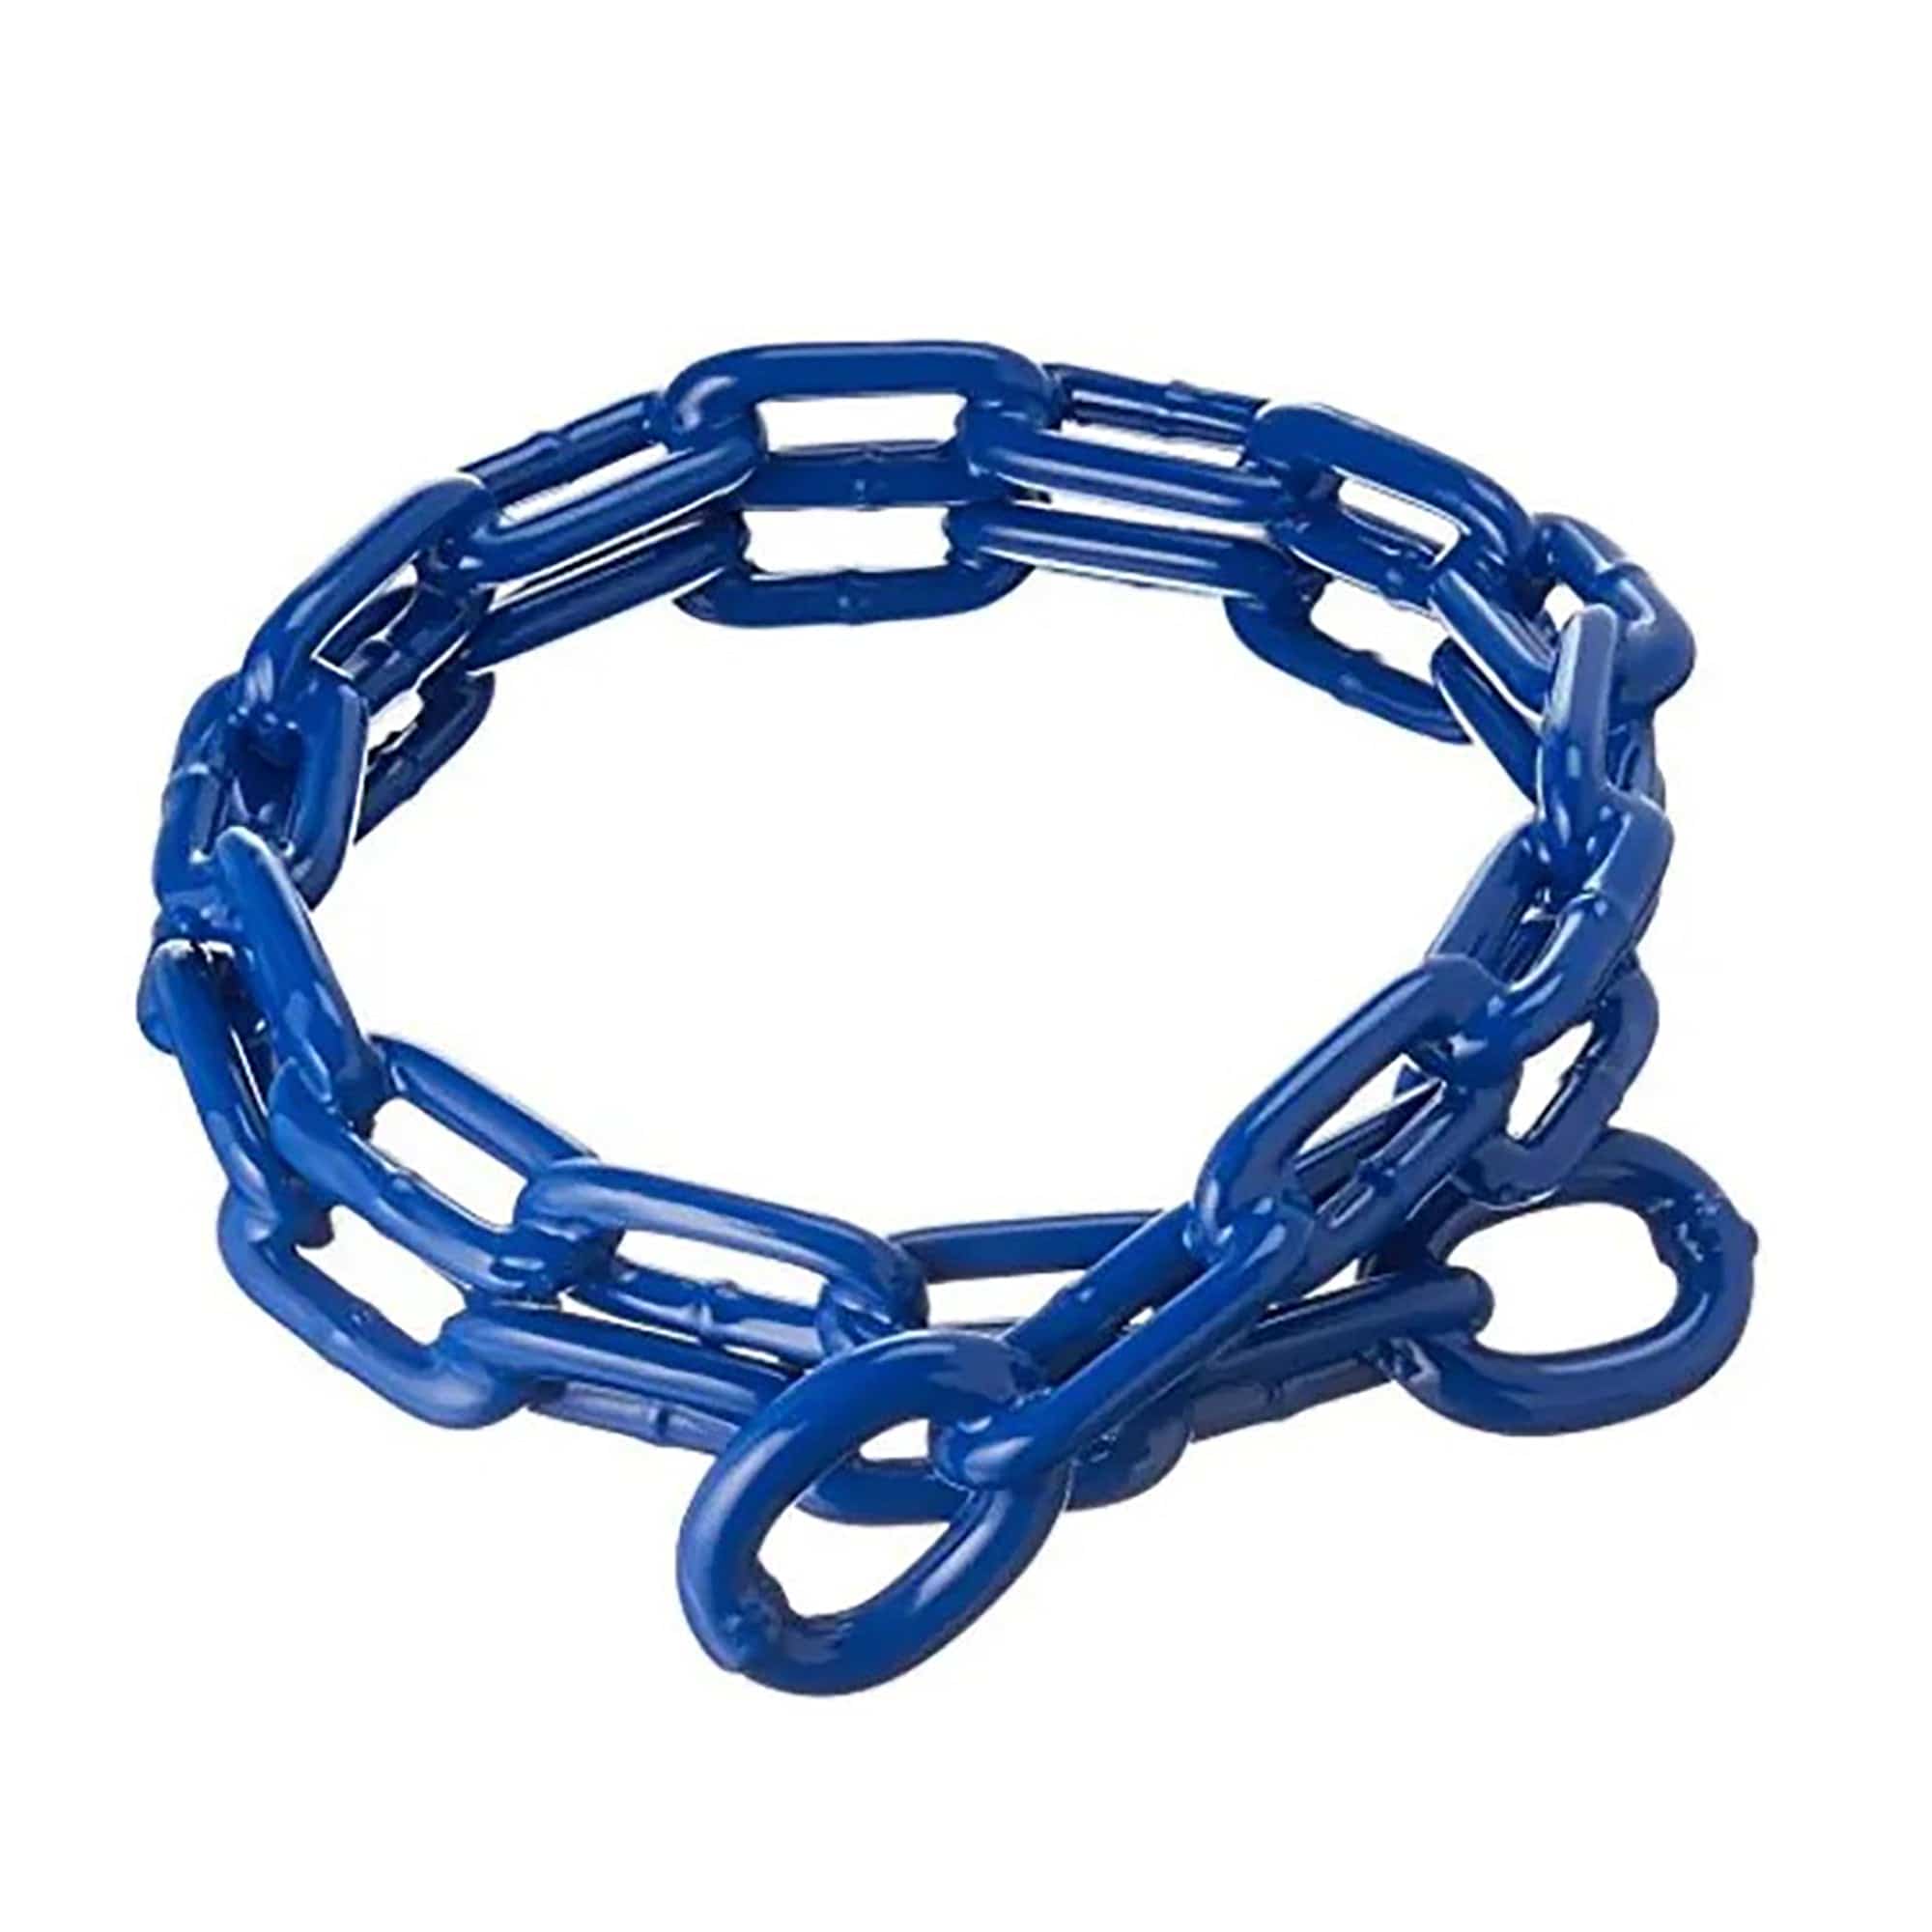 1/4" x 4' Blue PVC Coated Steel Anchor Chain Greenfield Products 2115-R